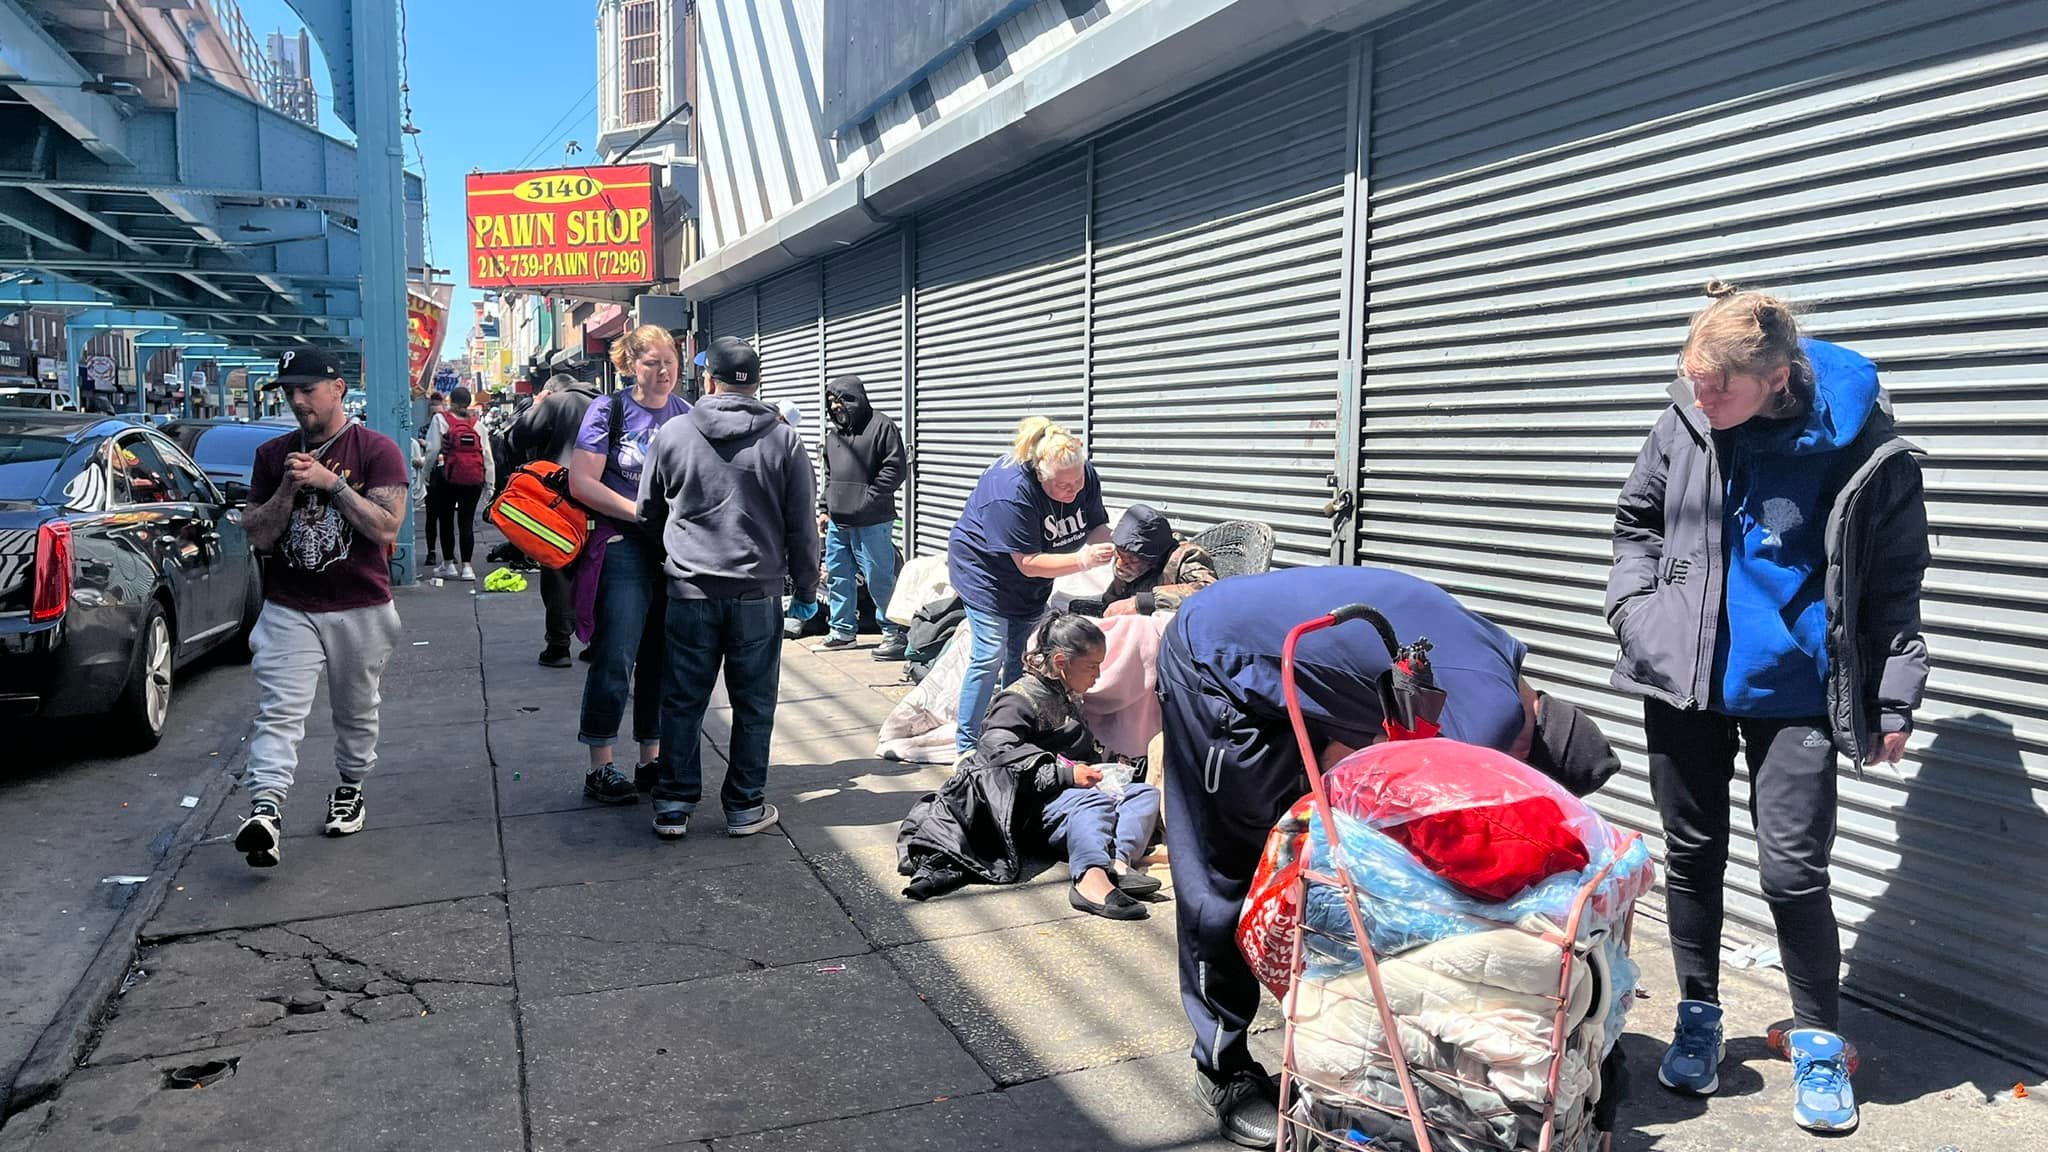 PLEASE PRAY!!! 
Today our team serving at our mobile outreach site on Kensington Ave rescued a young lady who has been on drugs for over 20 years! One of our team members is at UPenn Hospital right now with her as she is registering to an overnight d